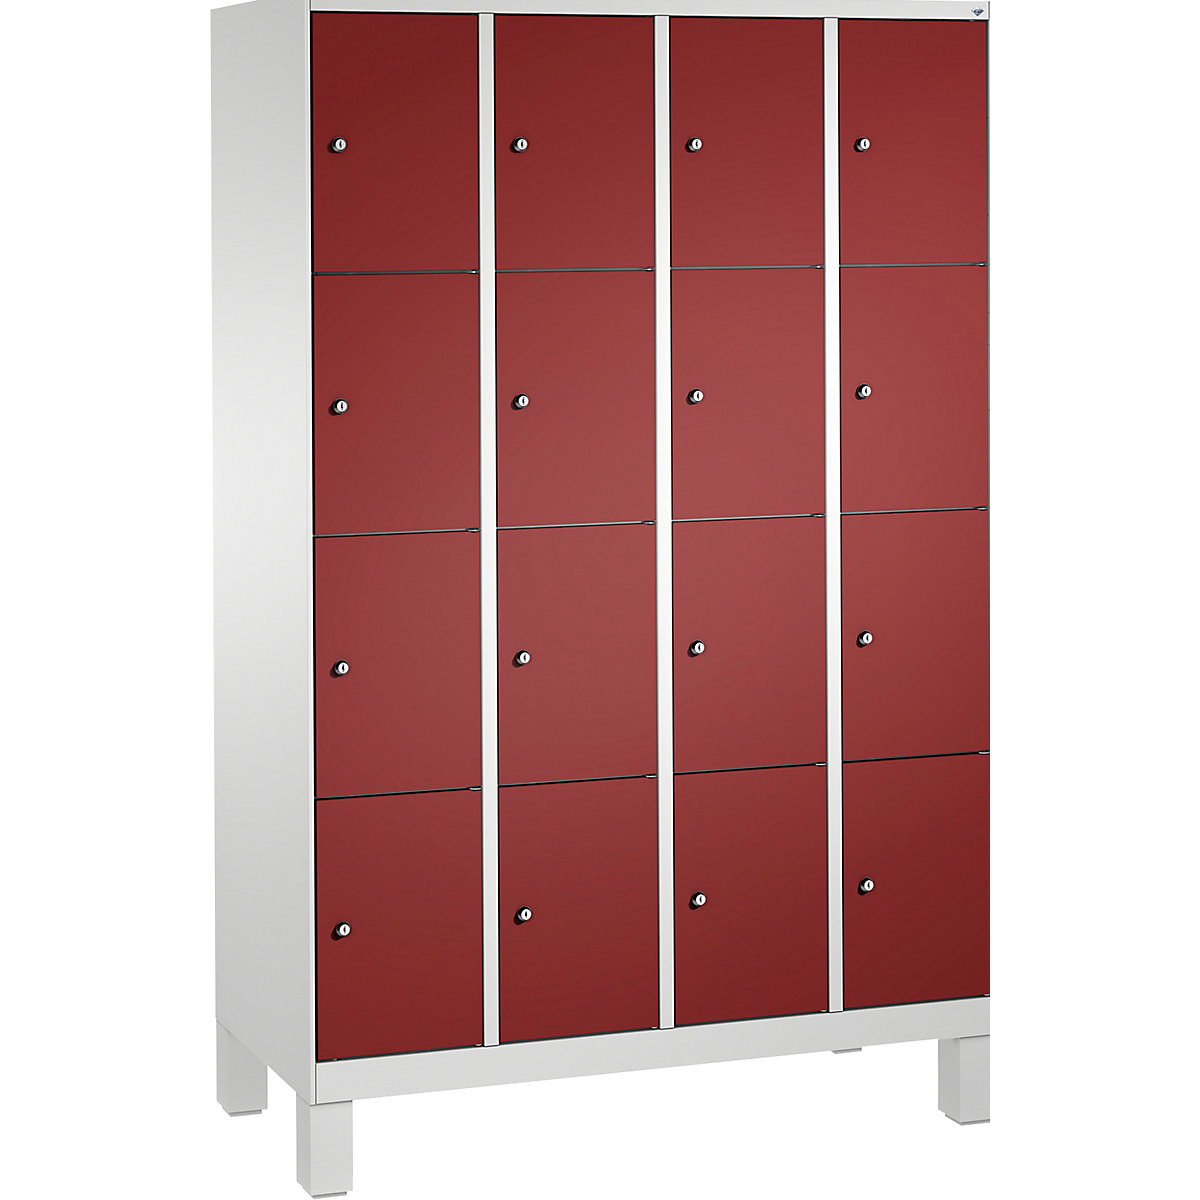 EVOLO locker unit, with feet – C+P, 4 compartments, 4 shelf compartments each, compartment width 300 mm, light grey / ruby red-10